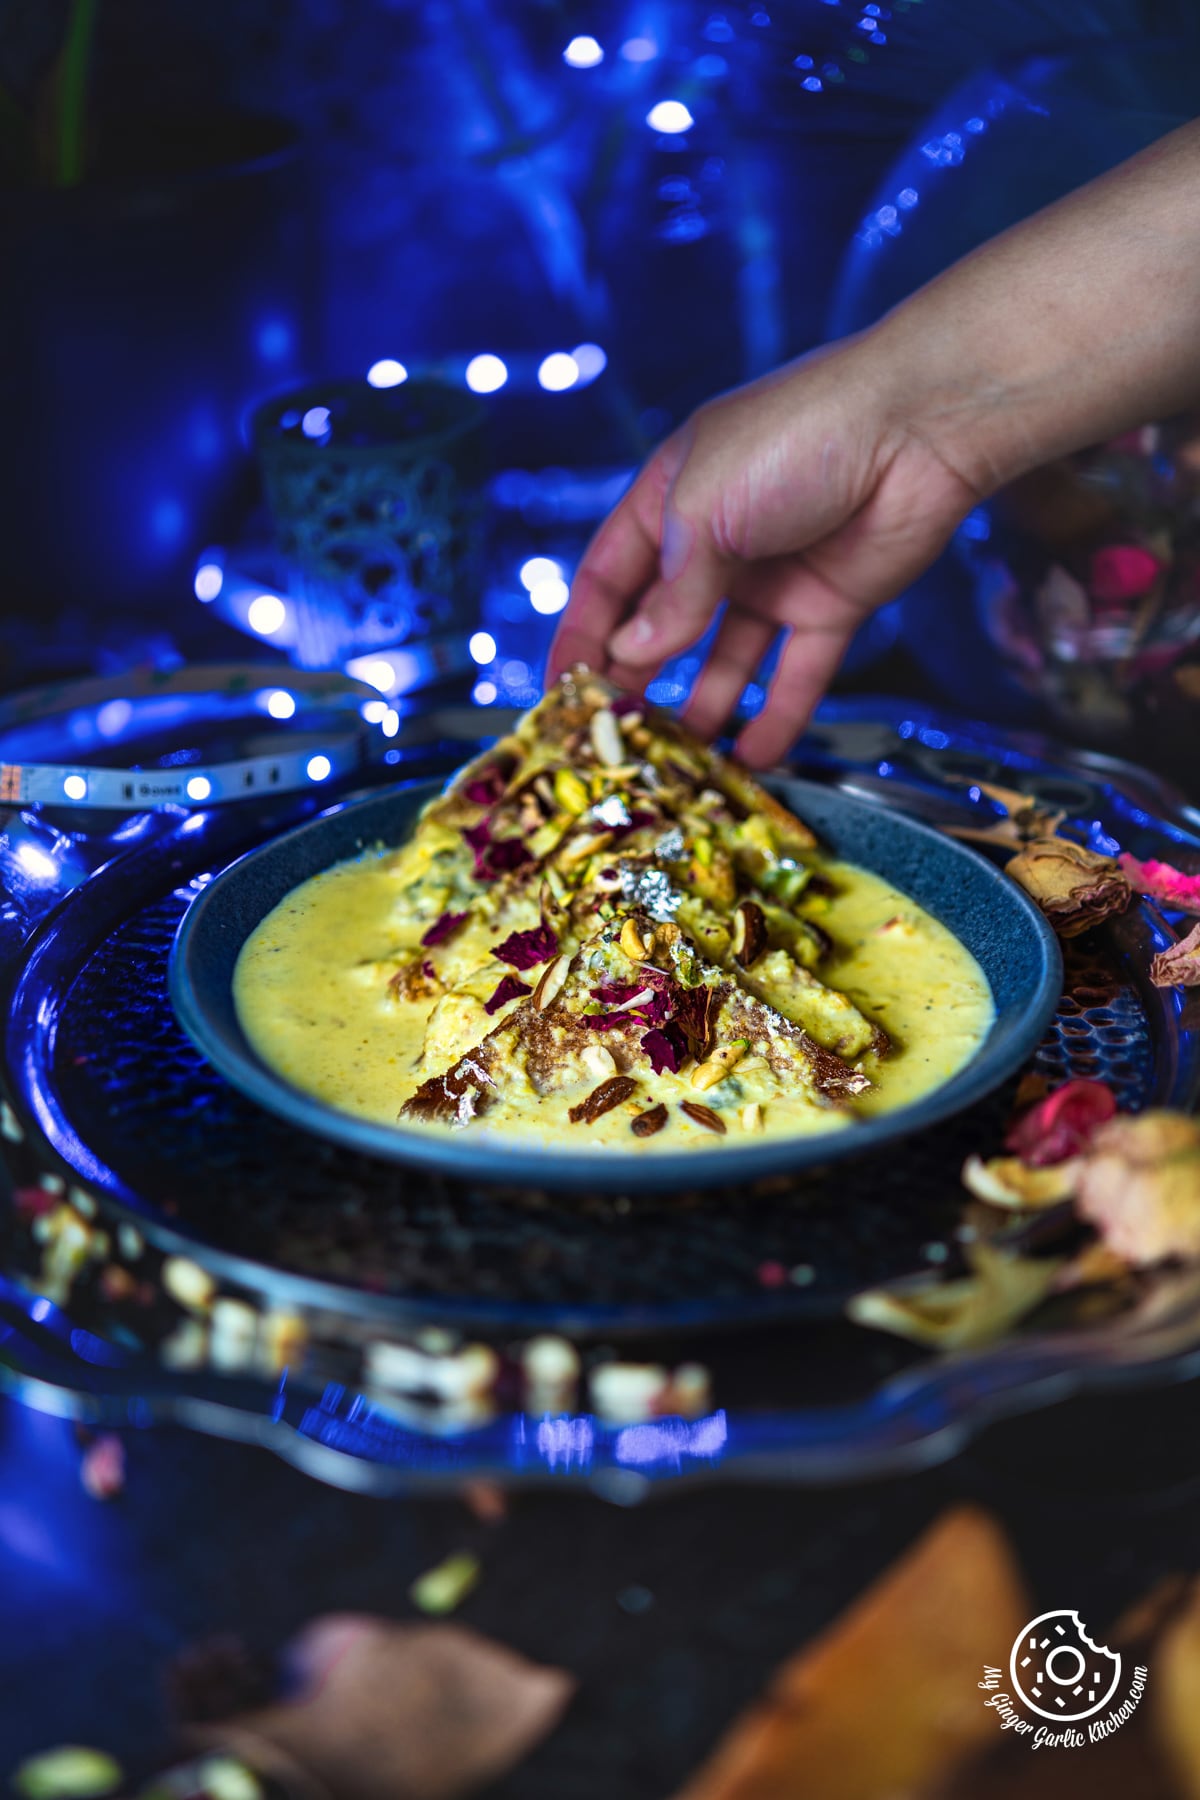 a hand is trying to hold shahi tukda or shahi tukra from the plate